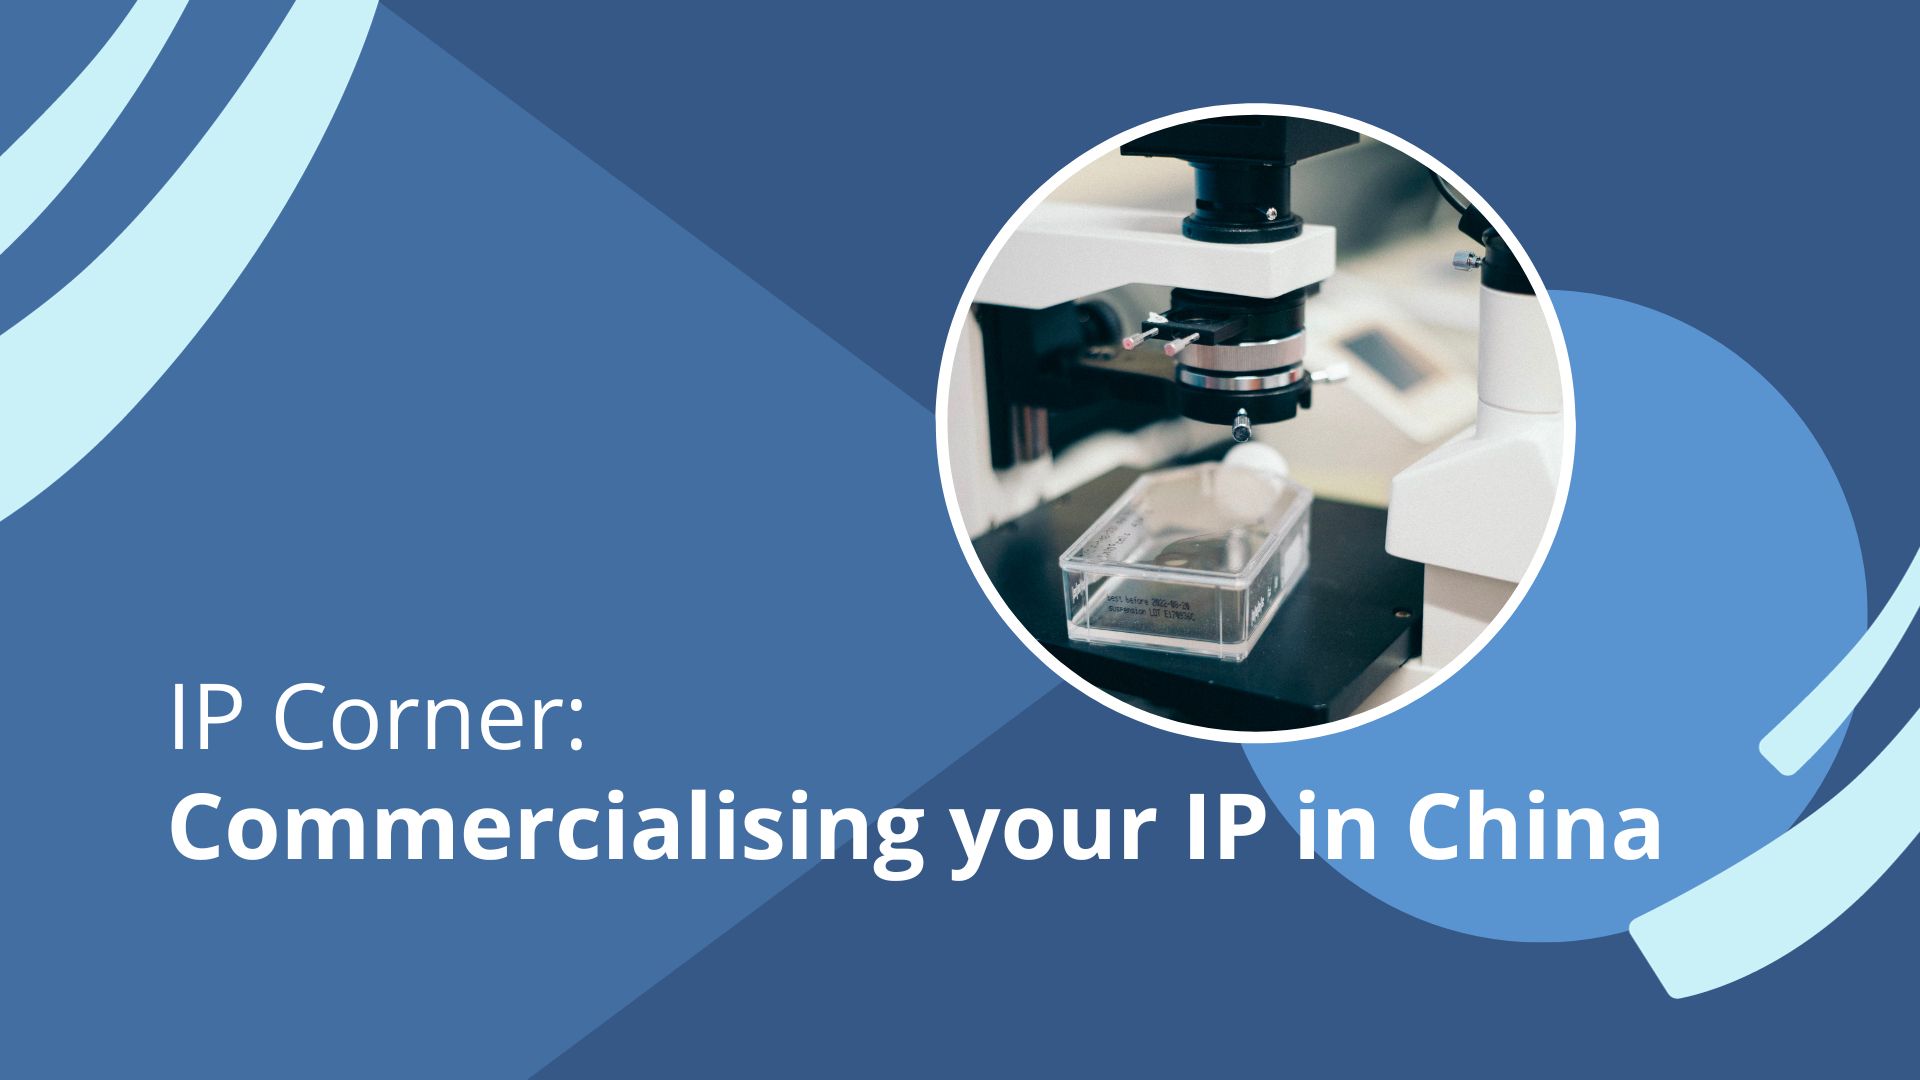 IP Corner: Commercialising your IP in China